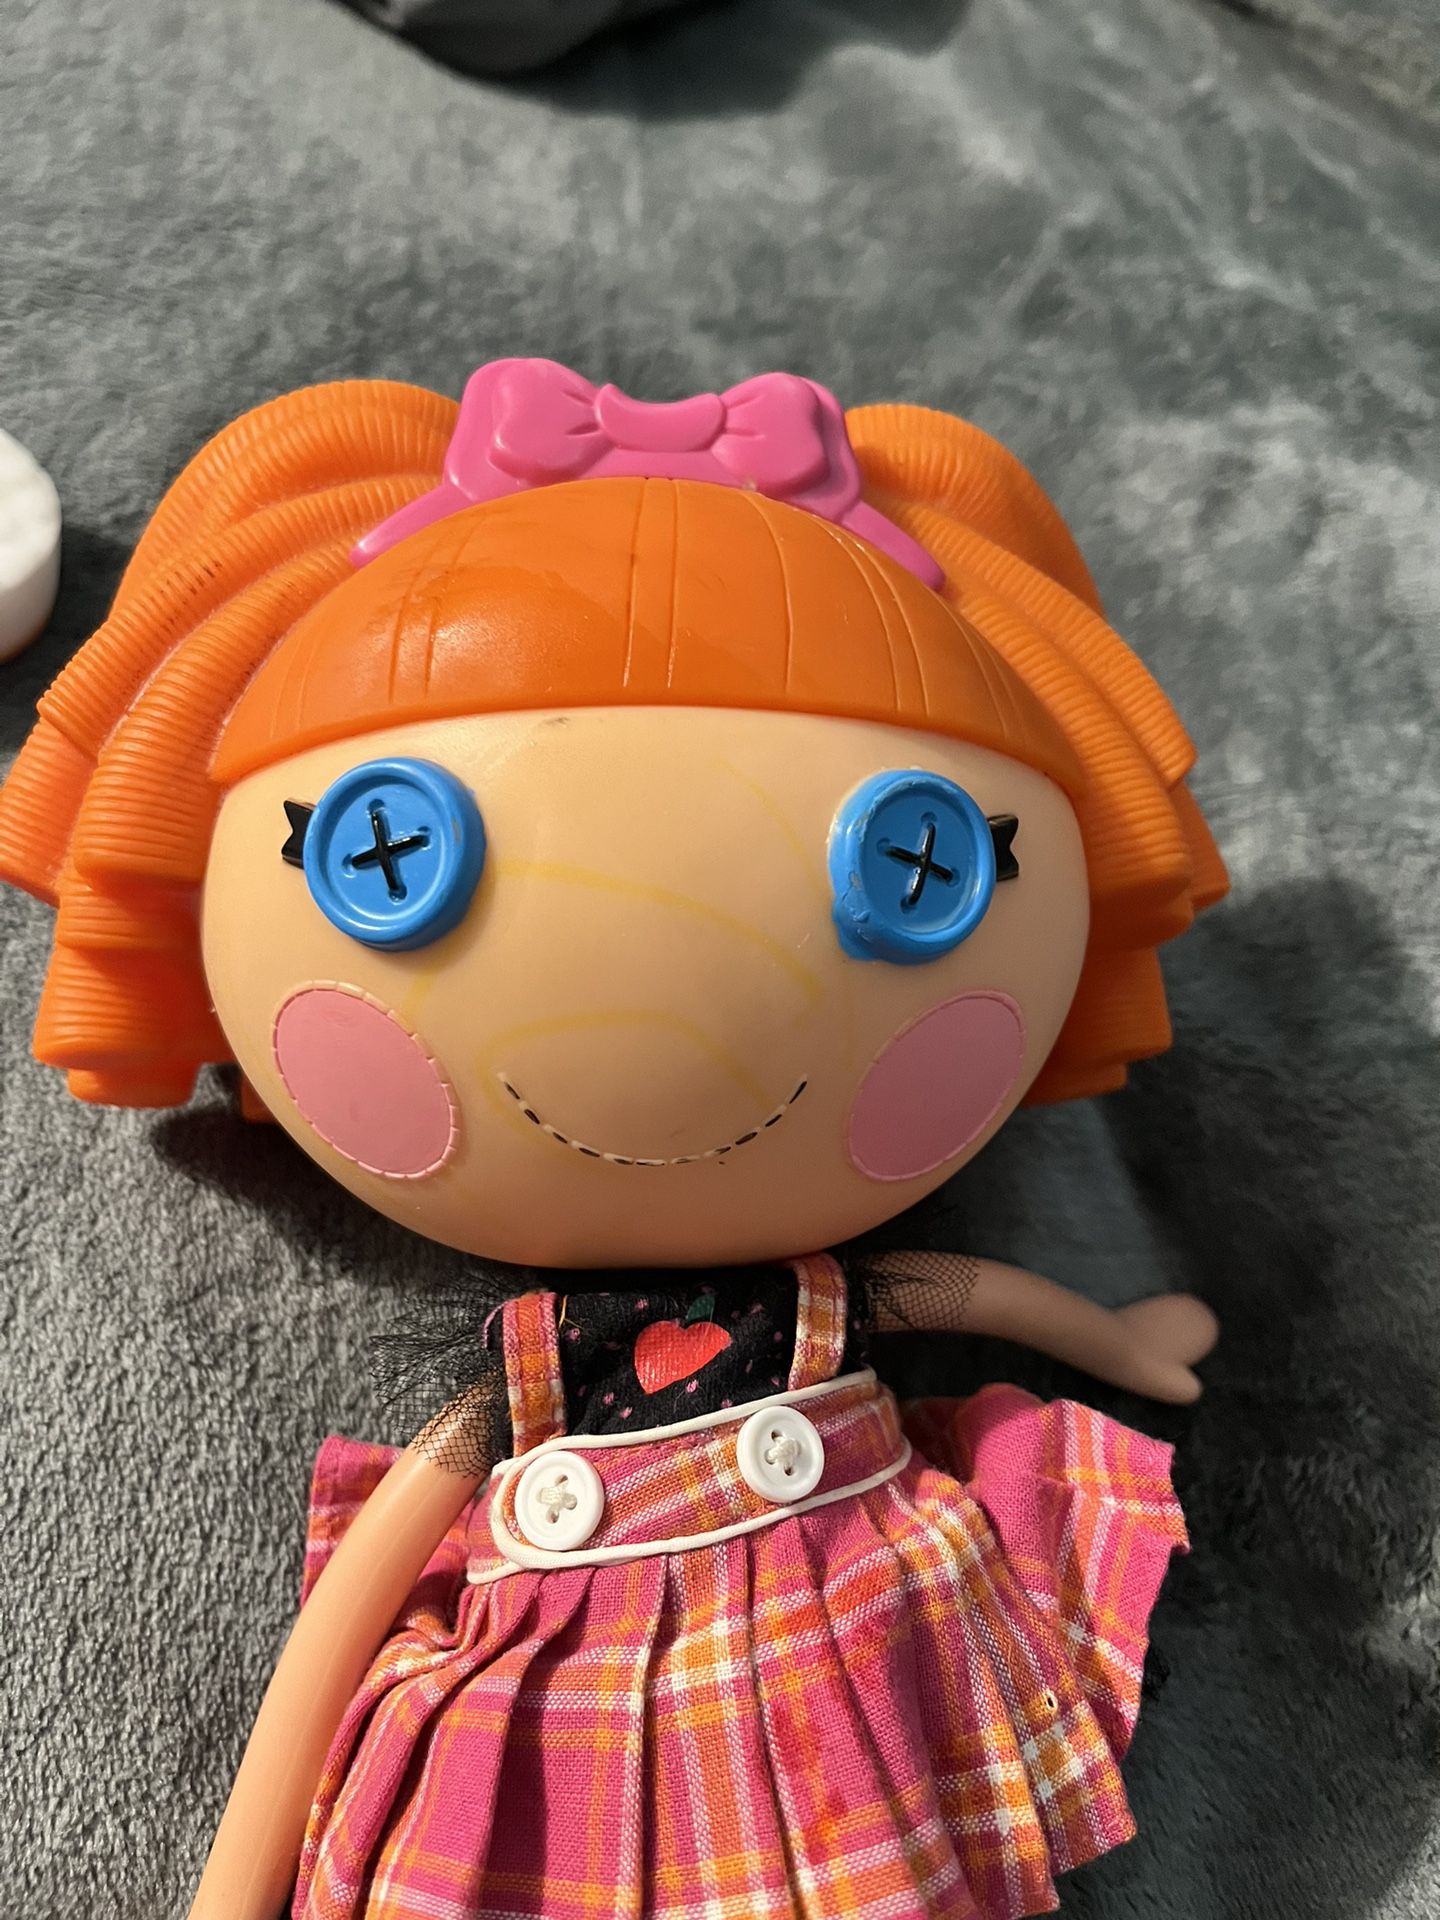 Lalaloopsy Bea Spells-a-Lot Full Size 12" Doll 2009 w/ full outfit and shoes